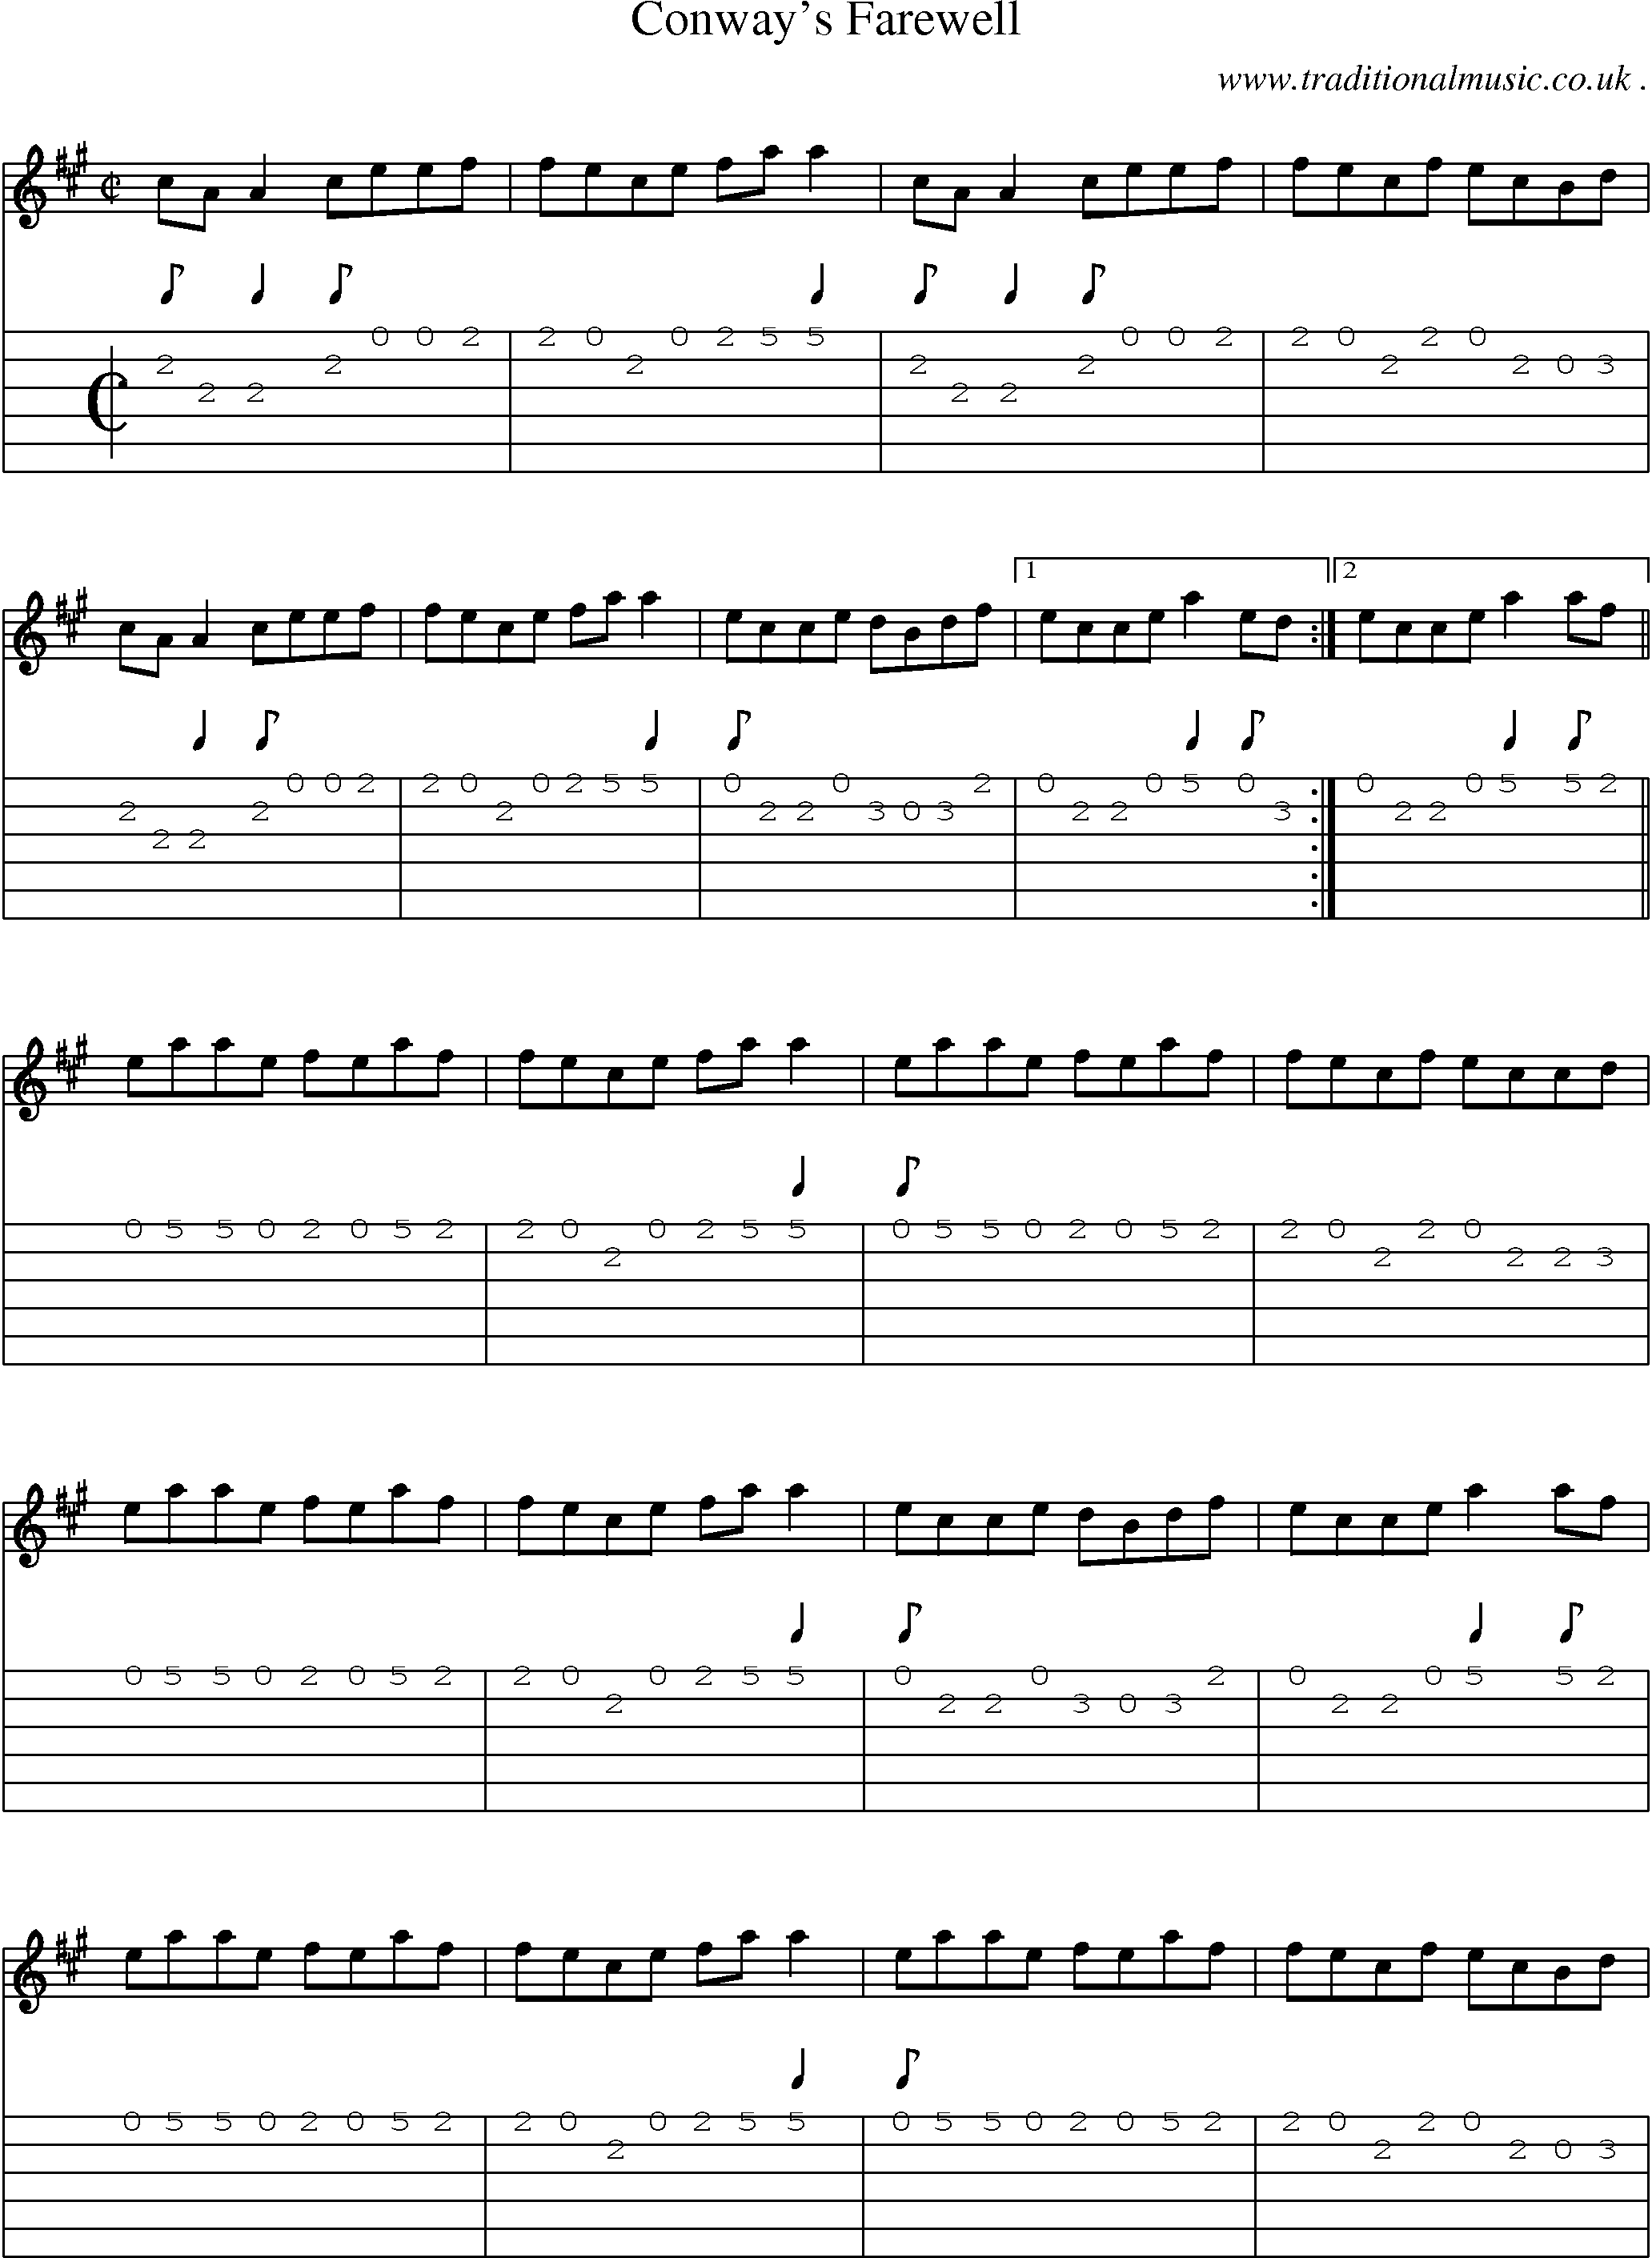 Sheet-Music and Guitar Tabs for Conways Farewell